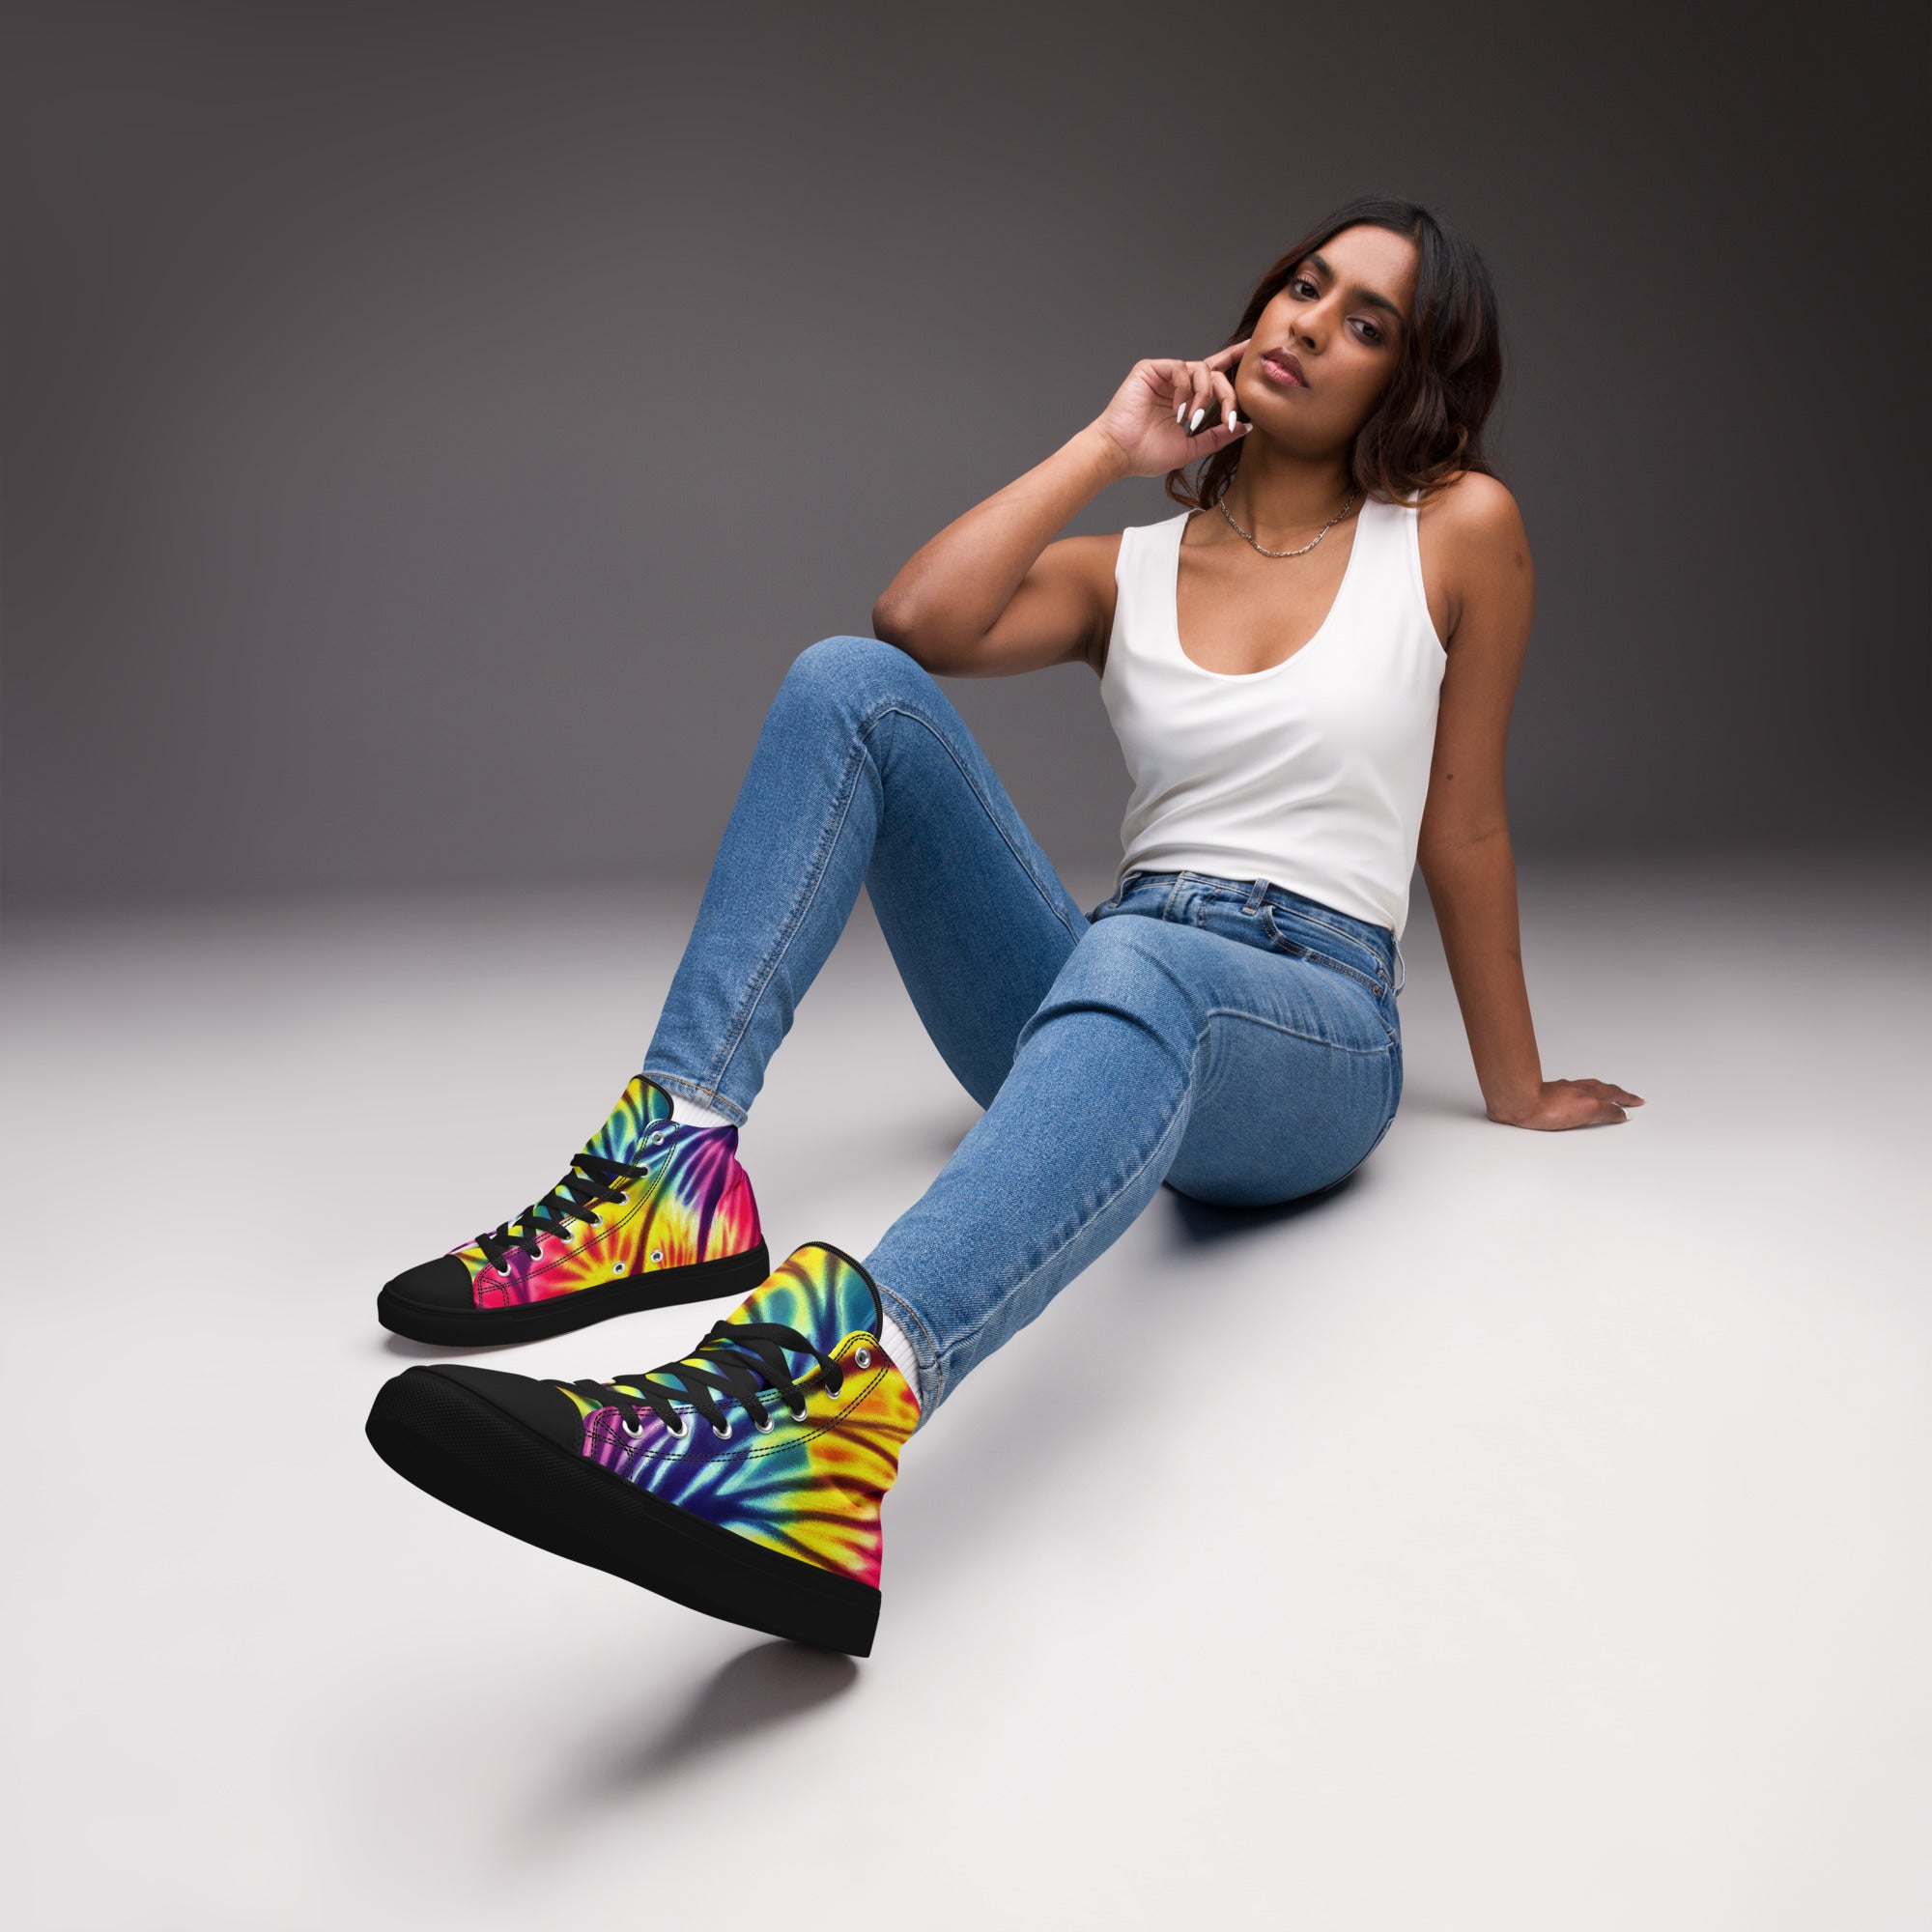 Women’s high top canvas shoes- Floral Tie Dye Pattern I